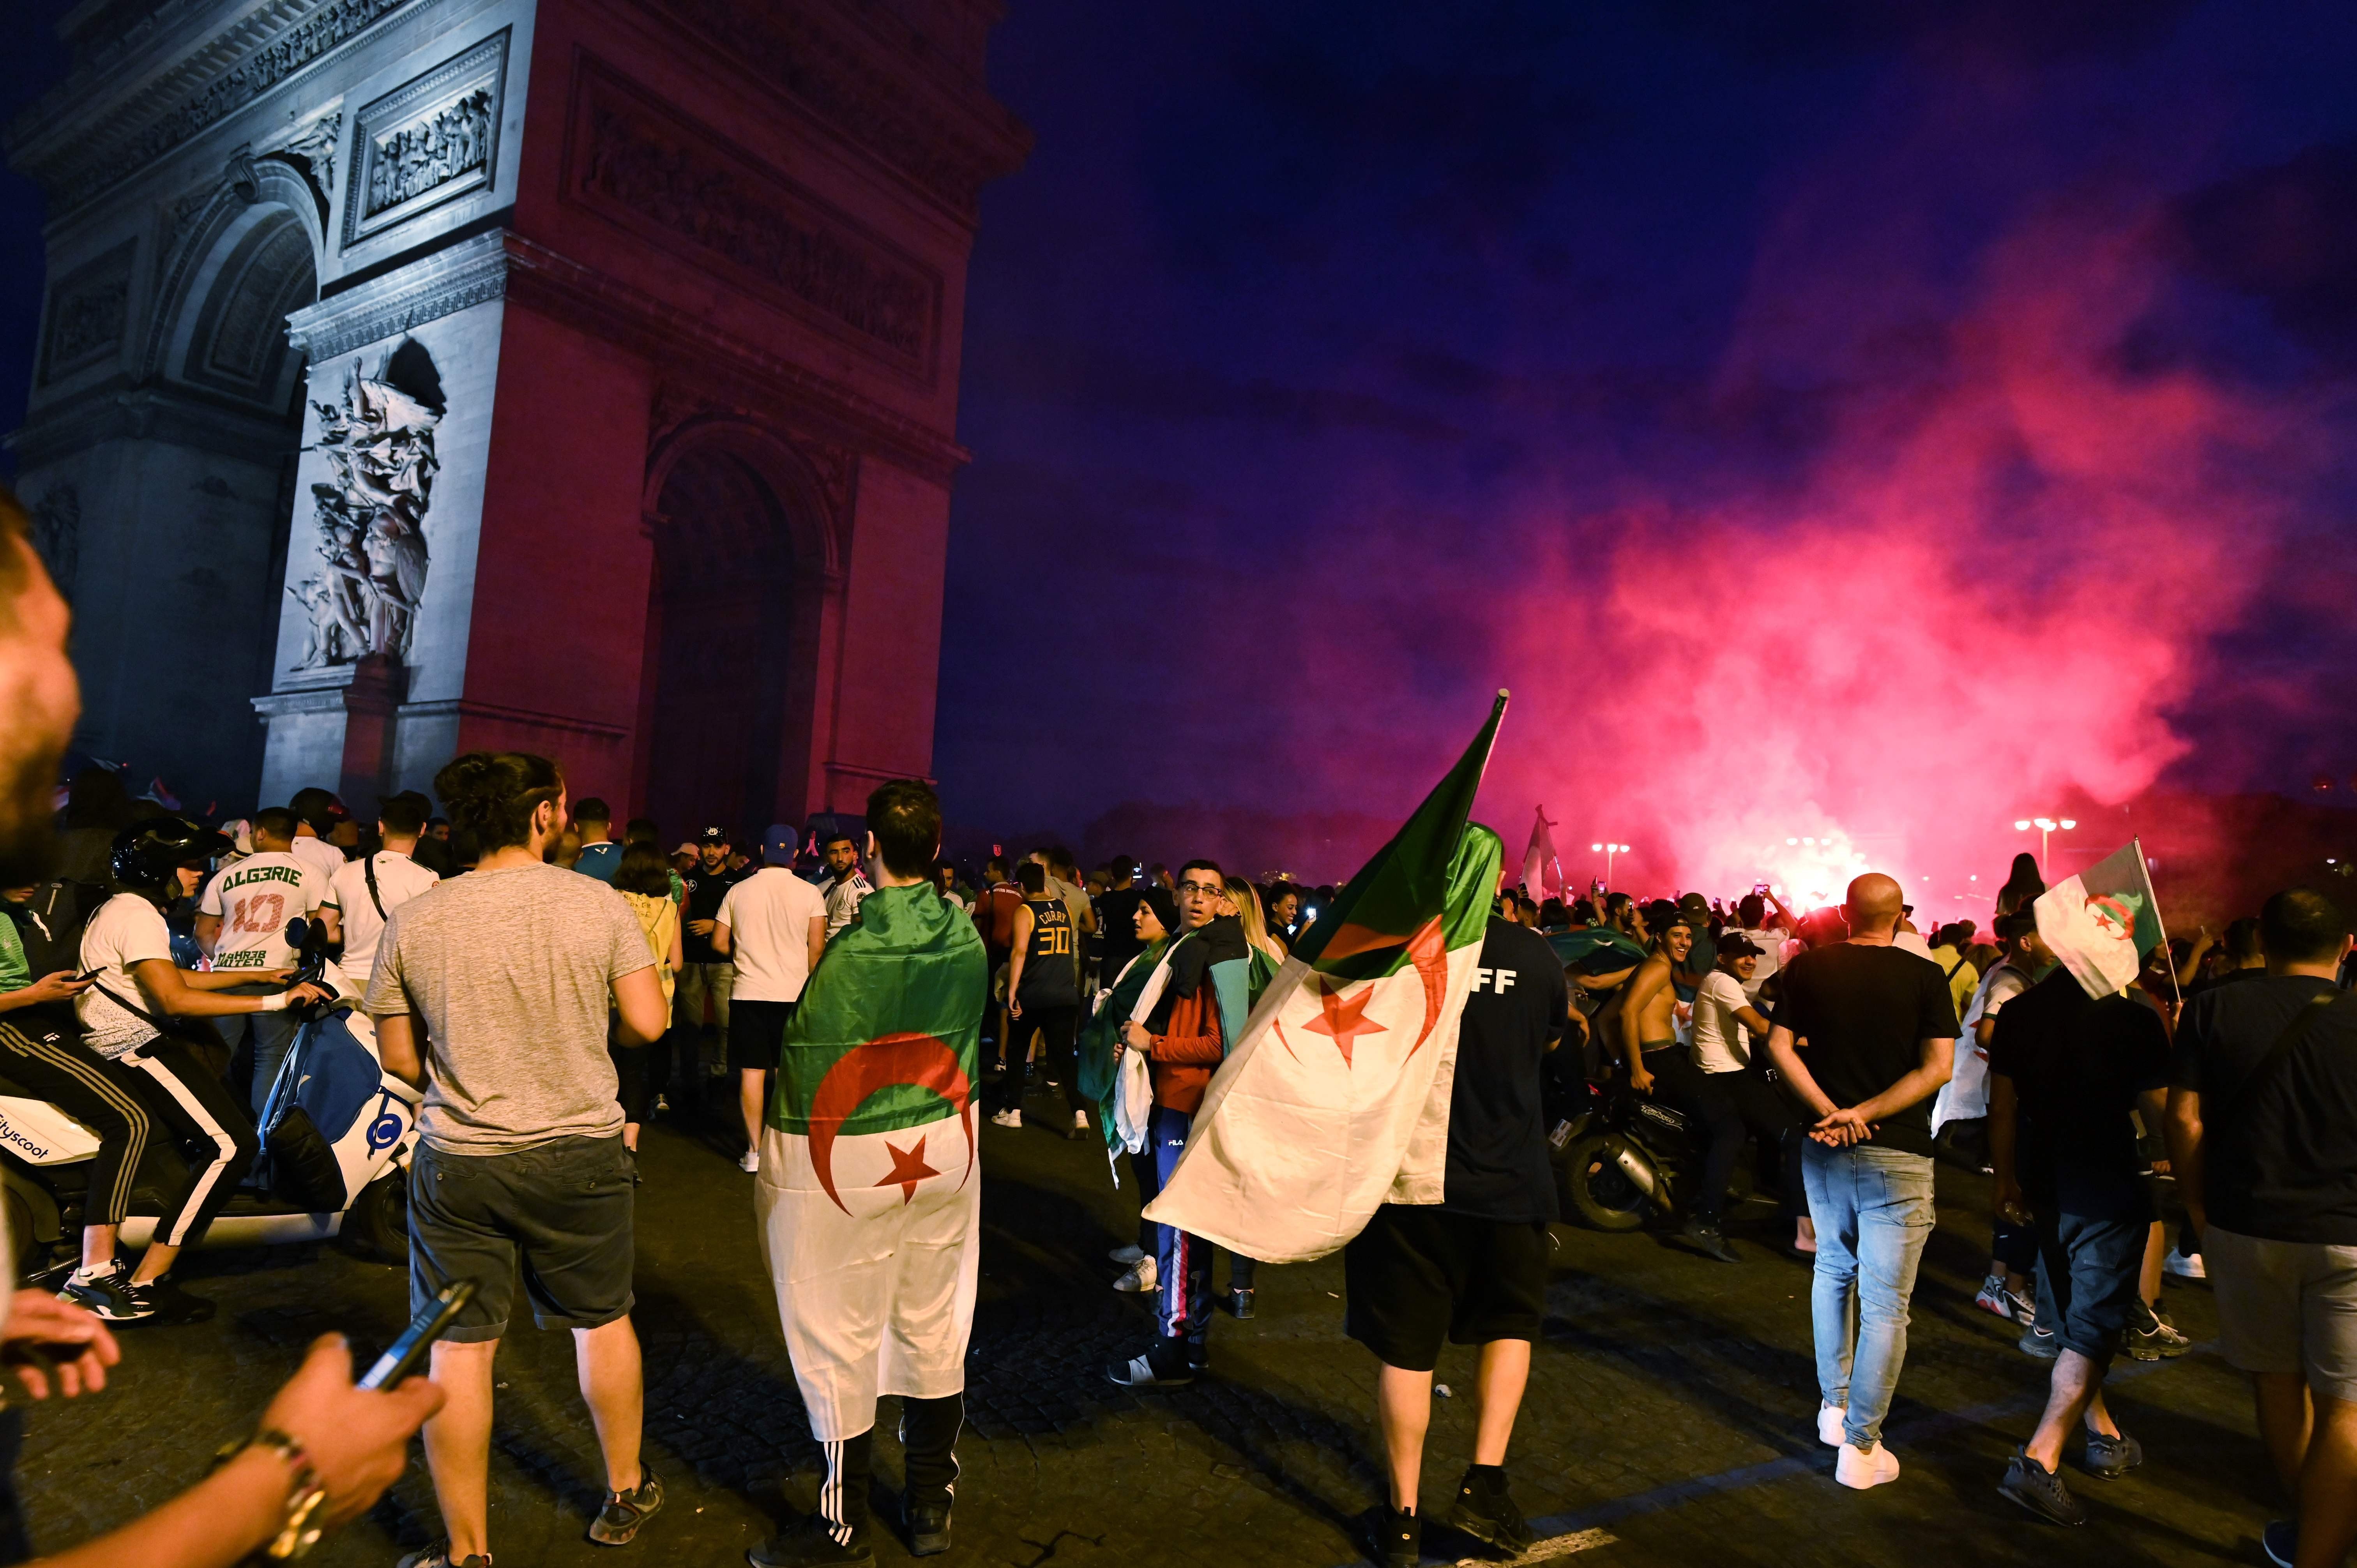 Algerian football fans celebrate the victory of their team near the Arc de Triomphe in Paris. Photo: AFP